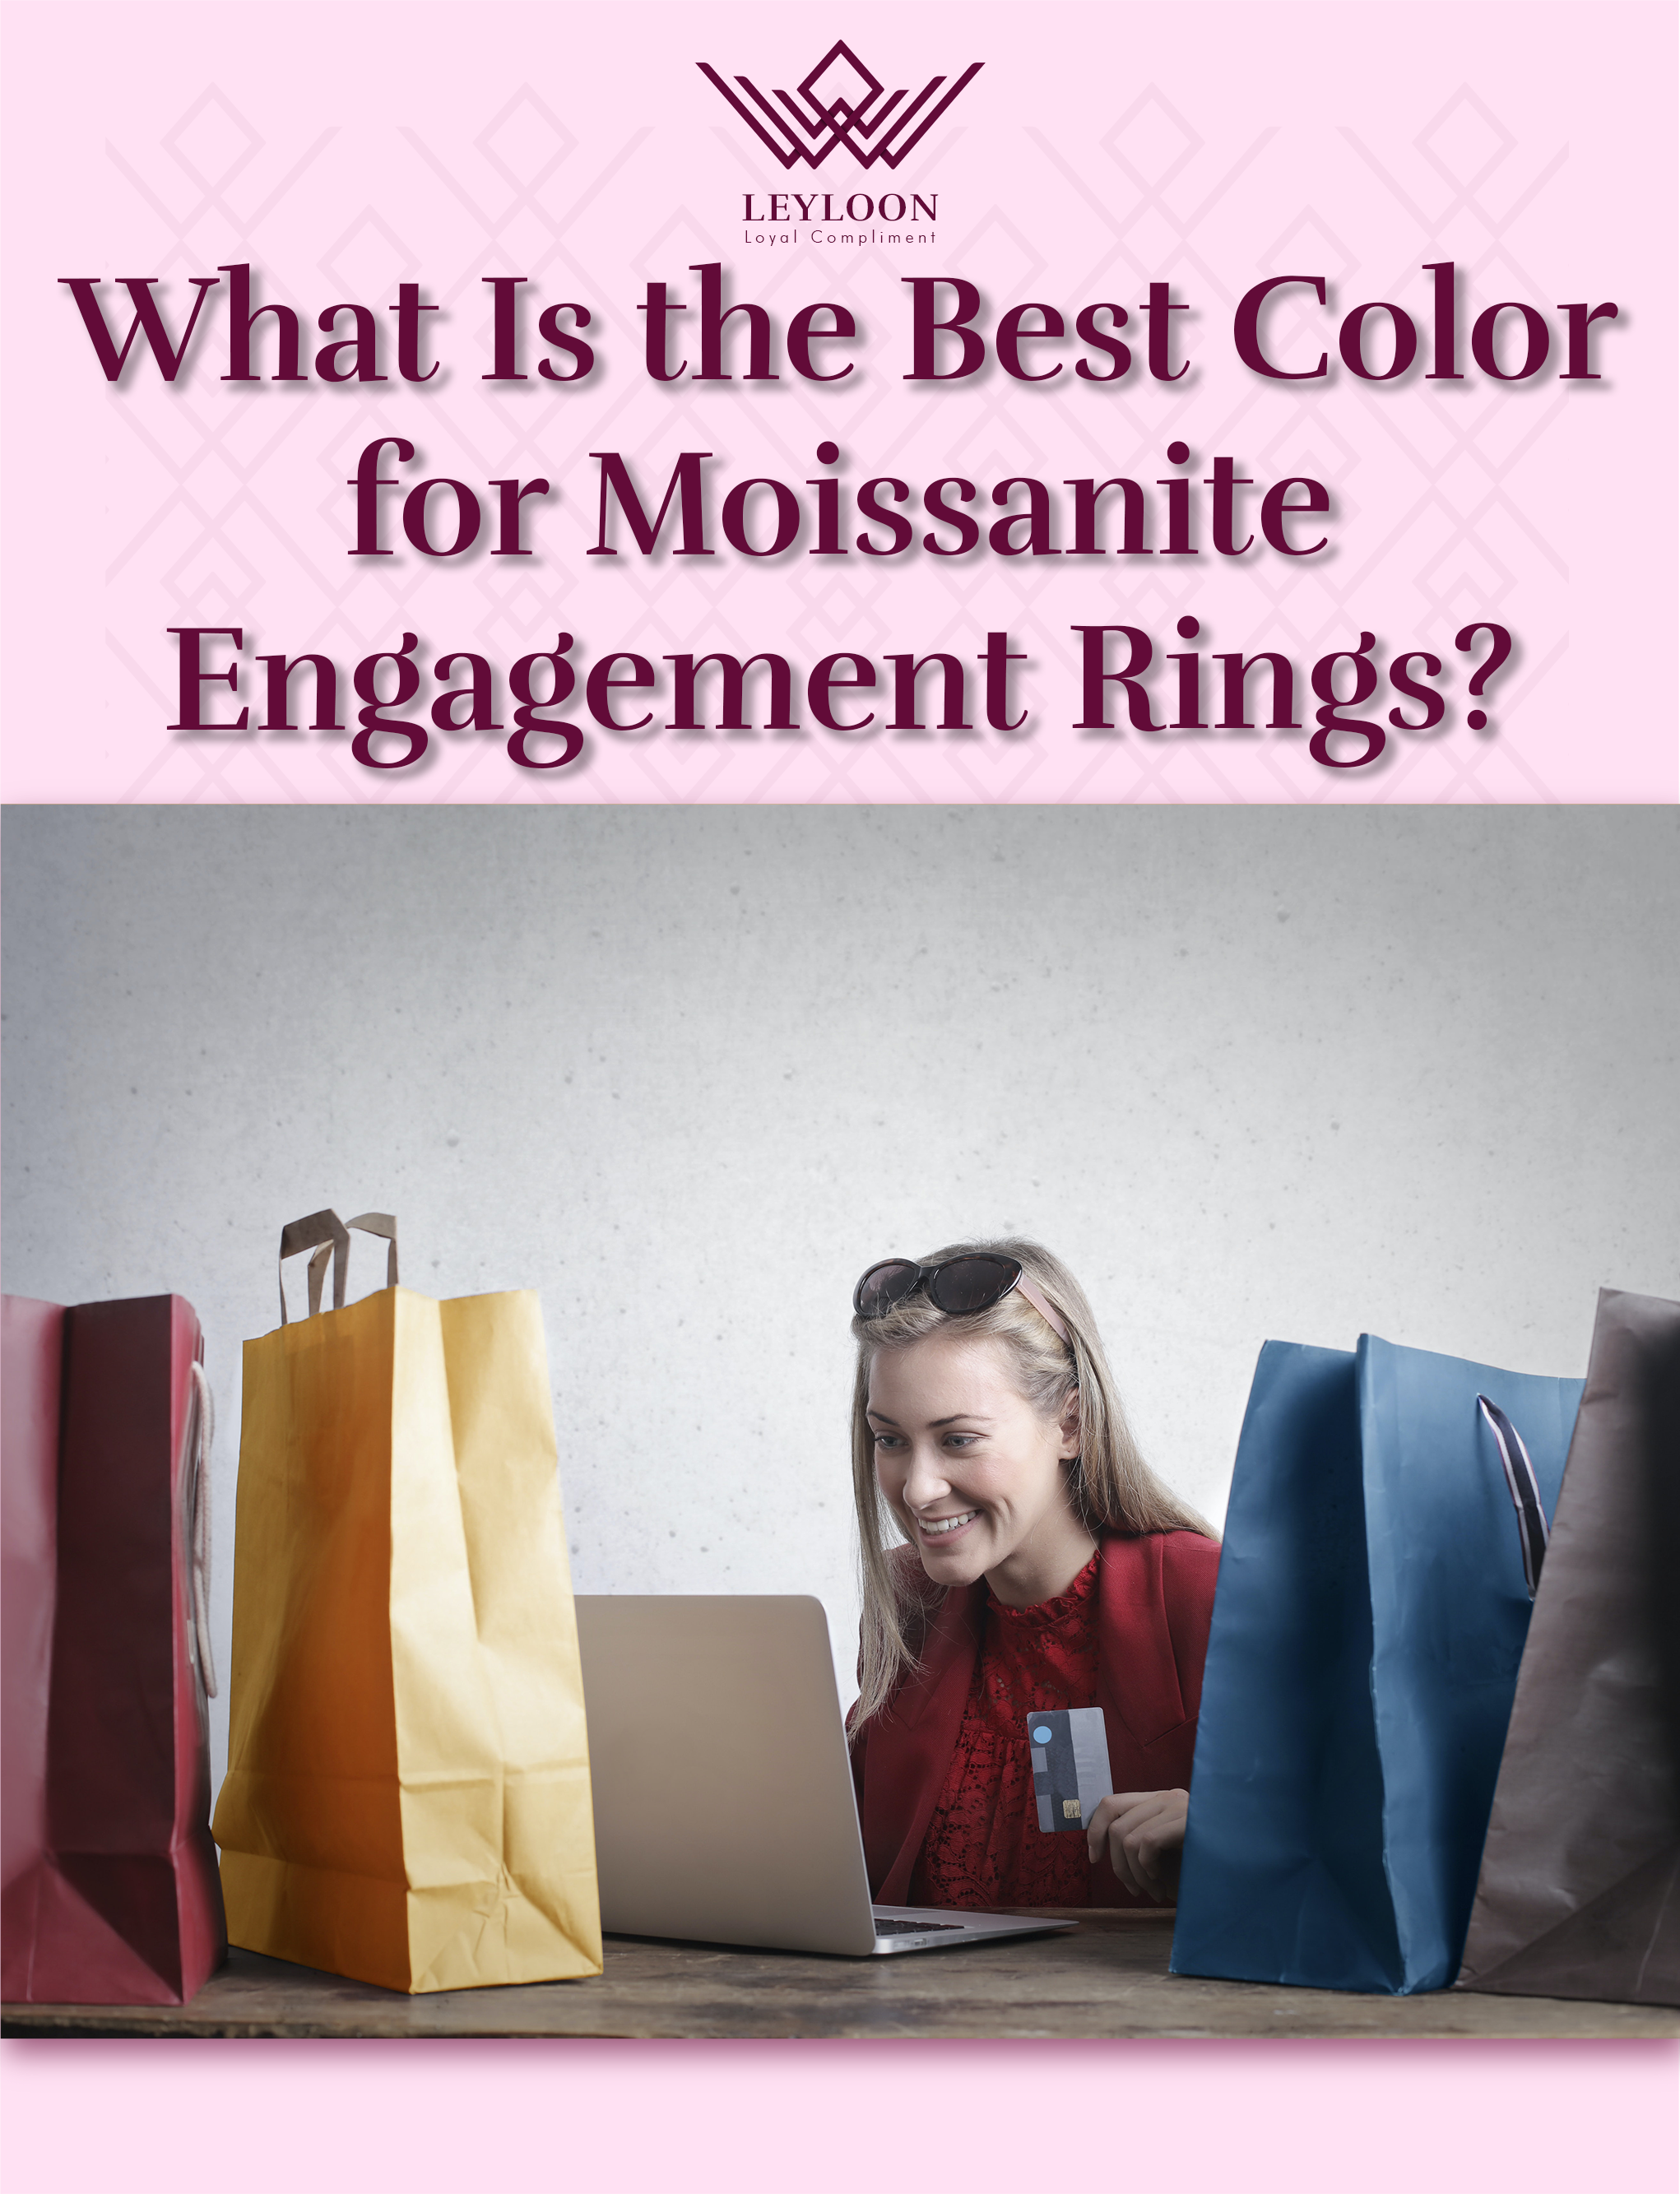 What Is the Best Color for Moissanite Engagement Rings?